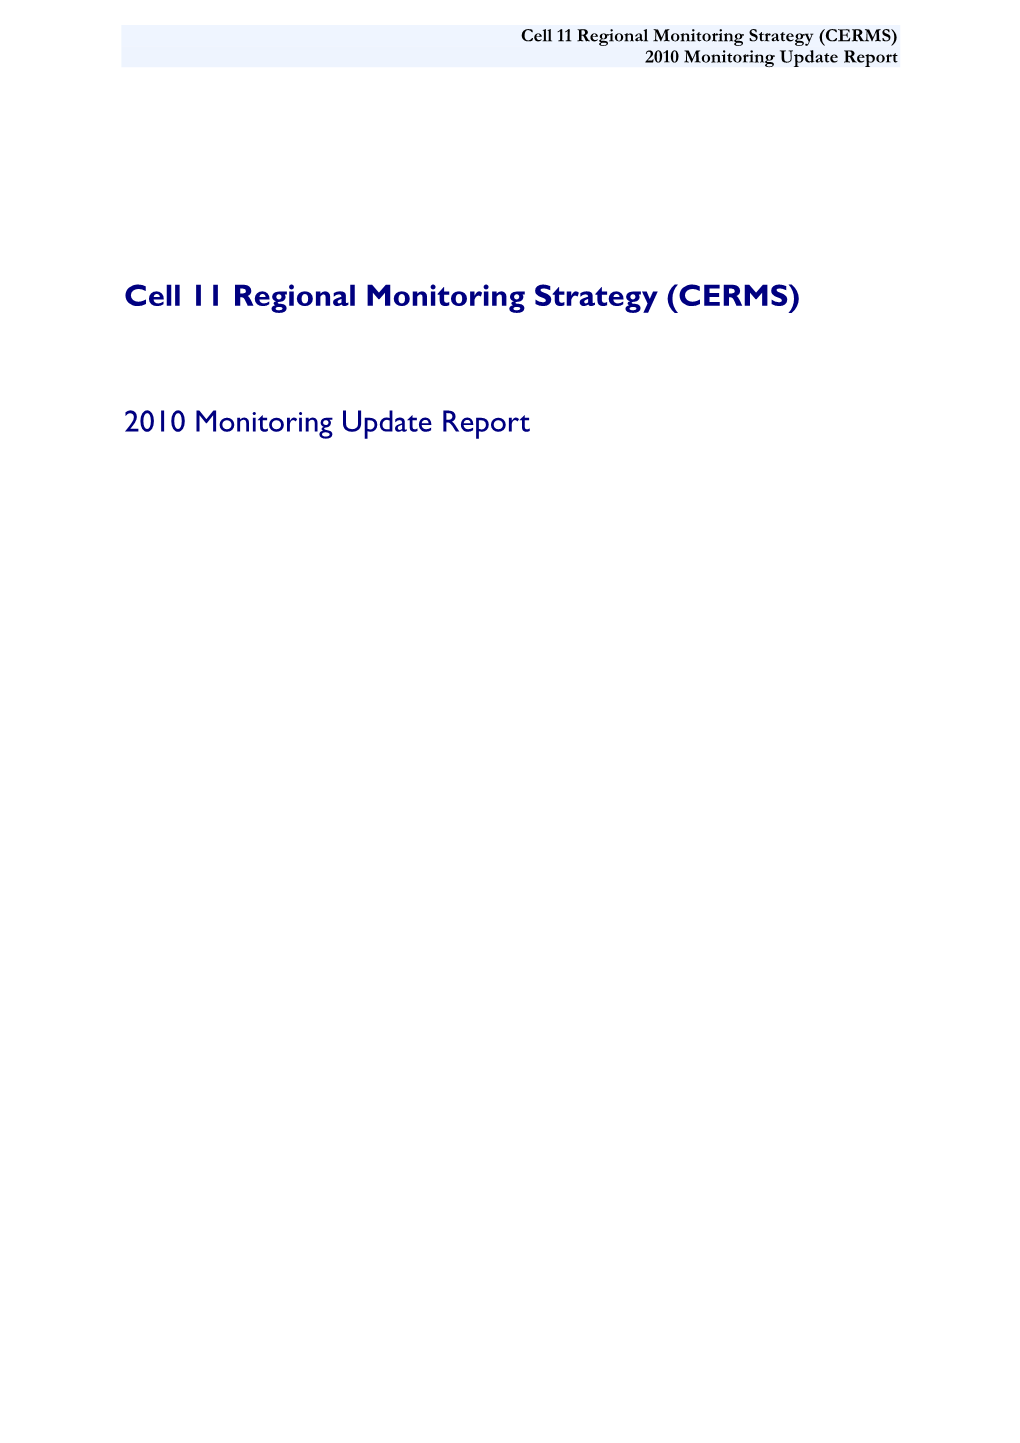 Cell 11 Regional Monitoring Strategy (CERMS) 2010 Monitoring Update Report